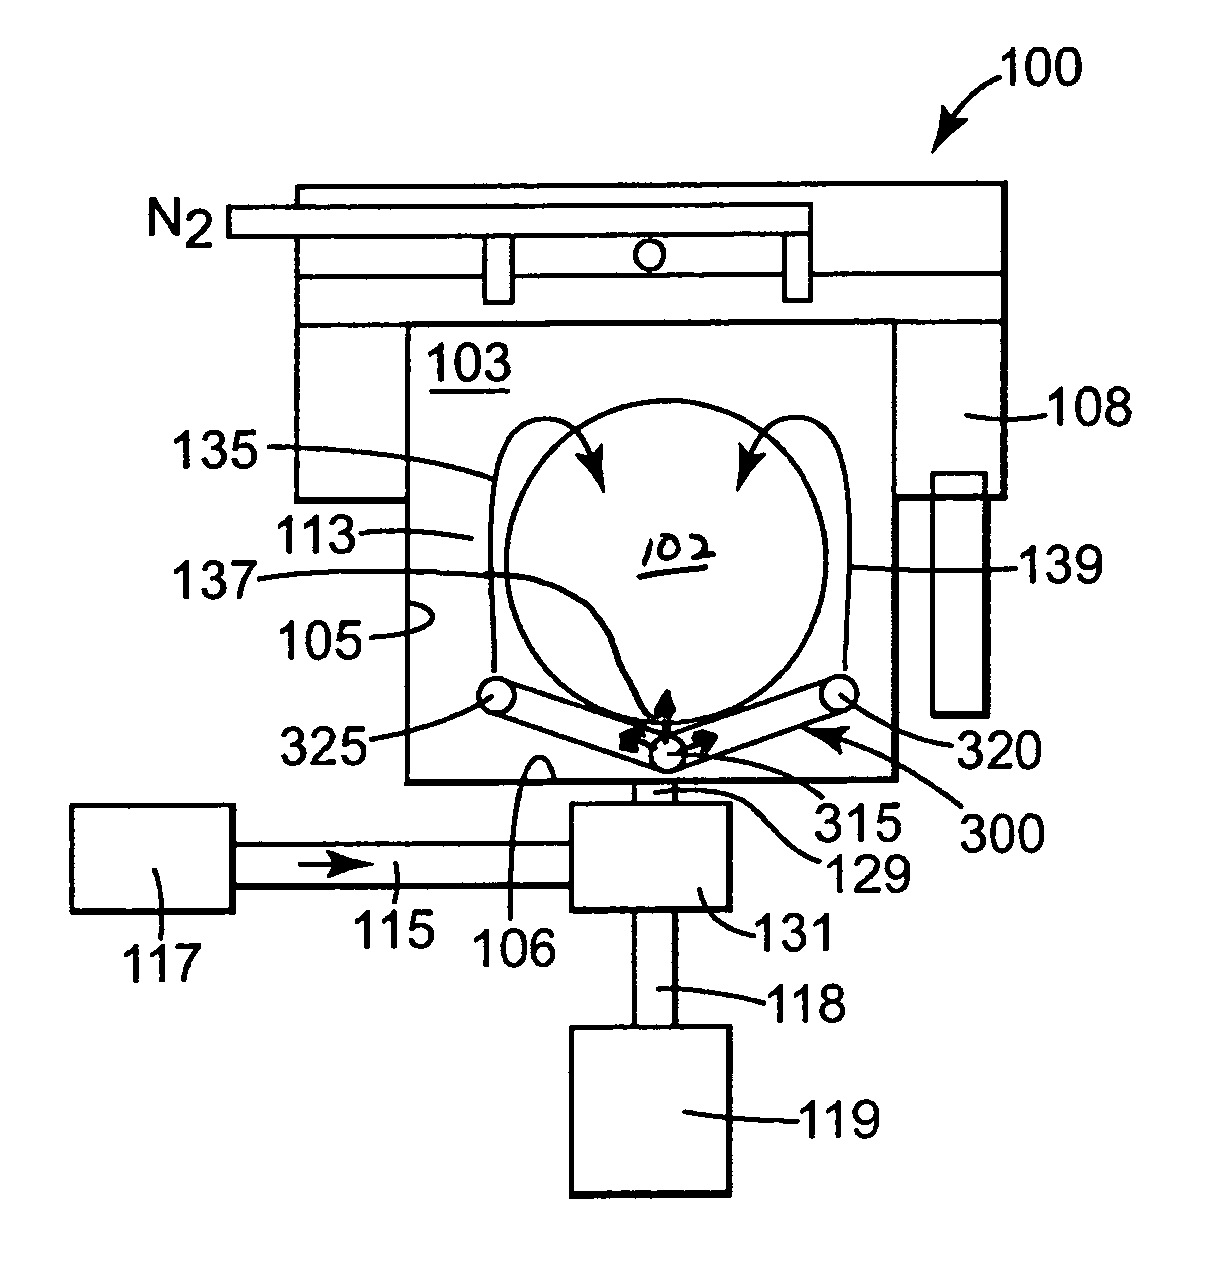 Transition flow treatment process and apparatus